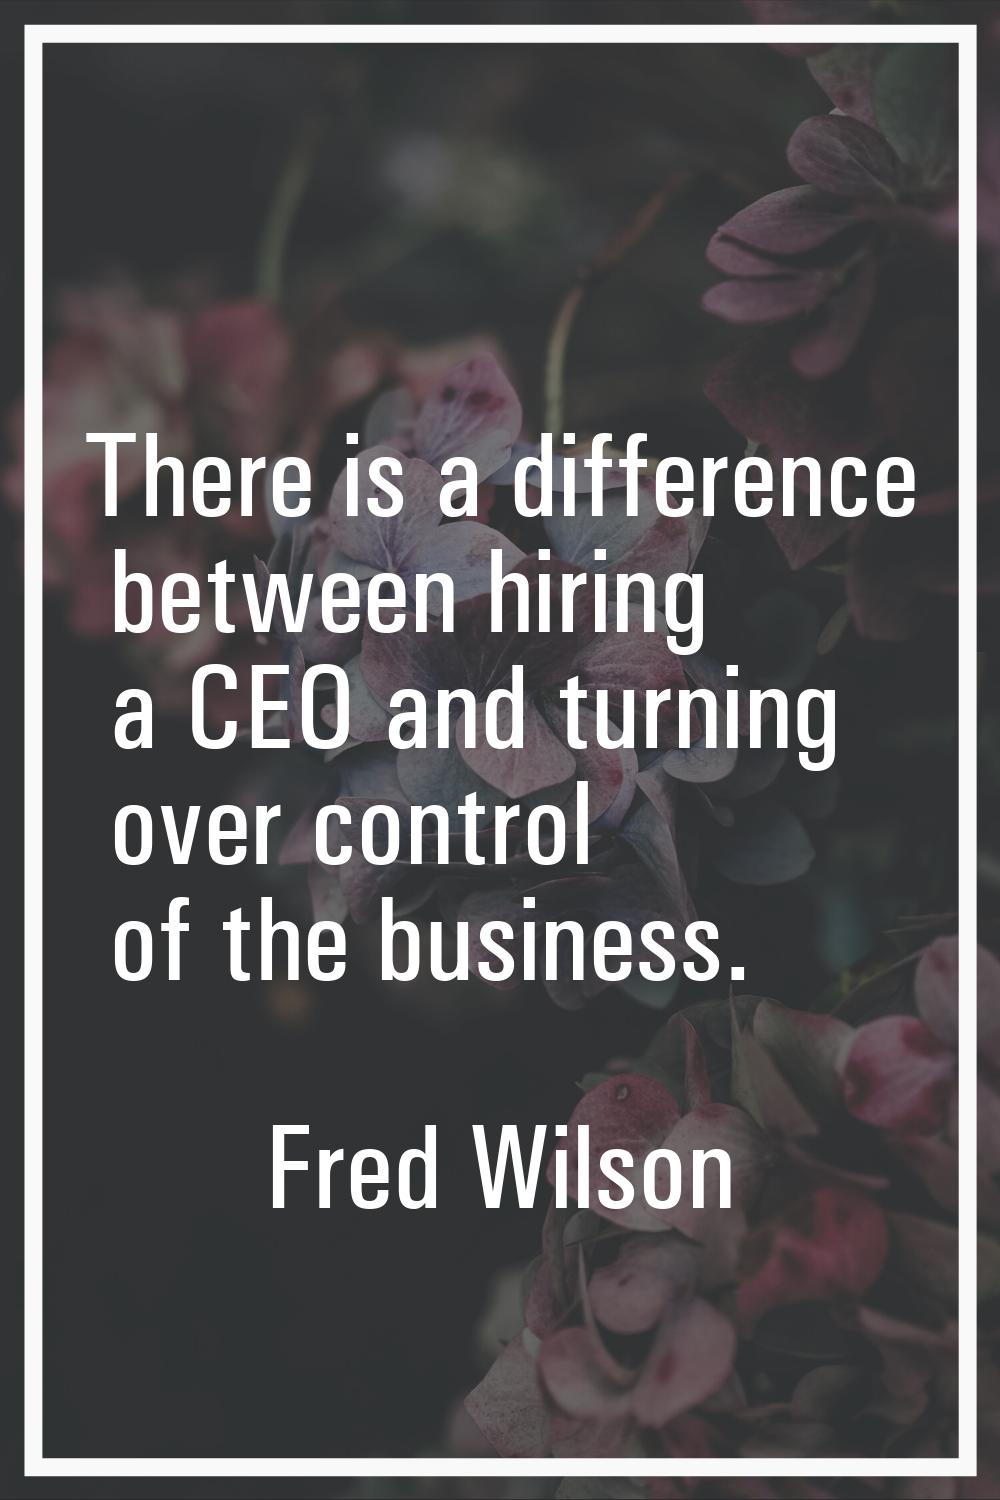 There is a difference between hiring a CEO and turning over control of the business.